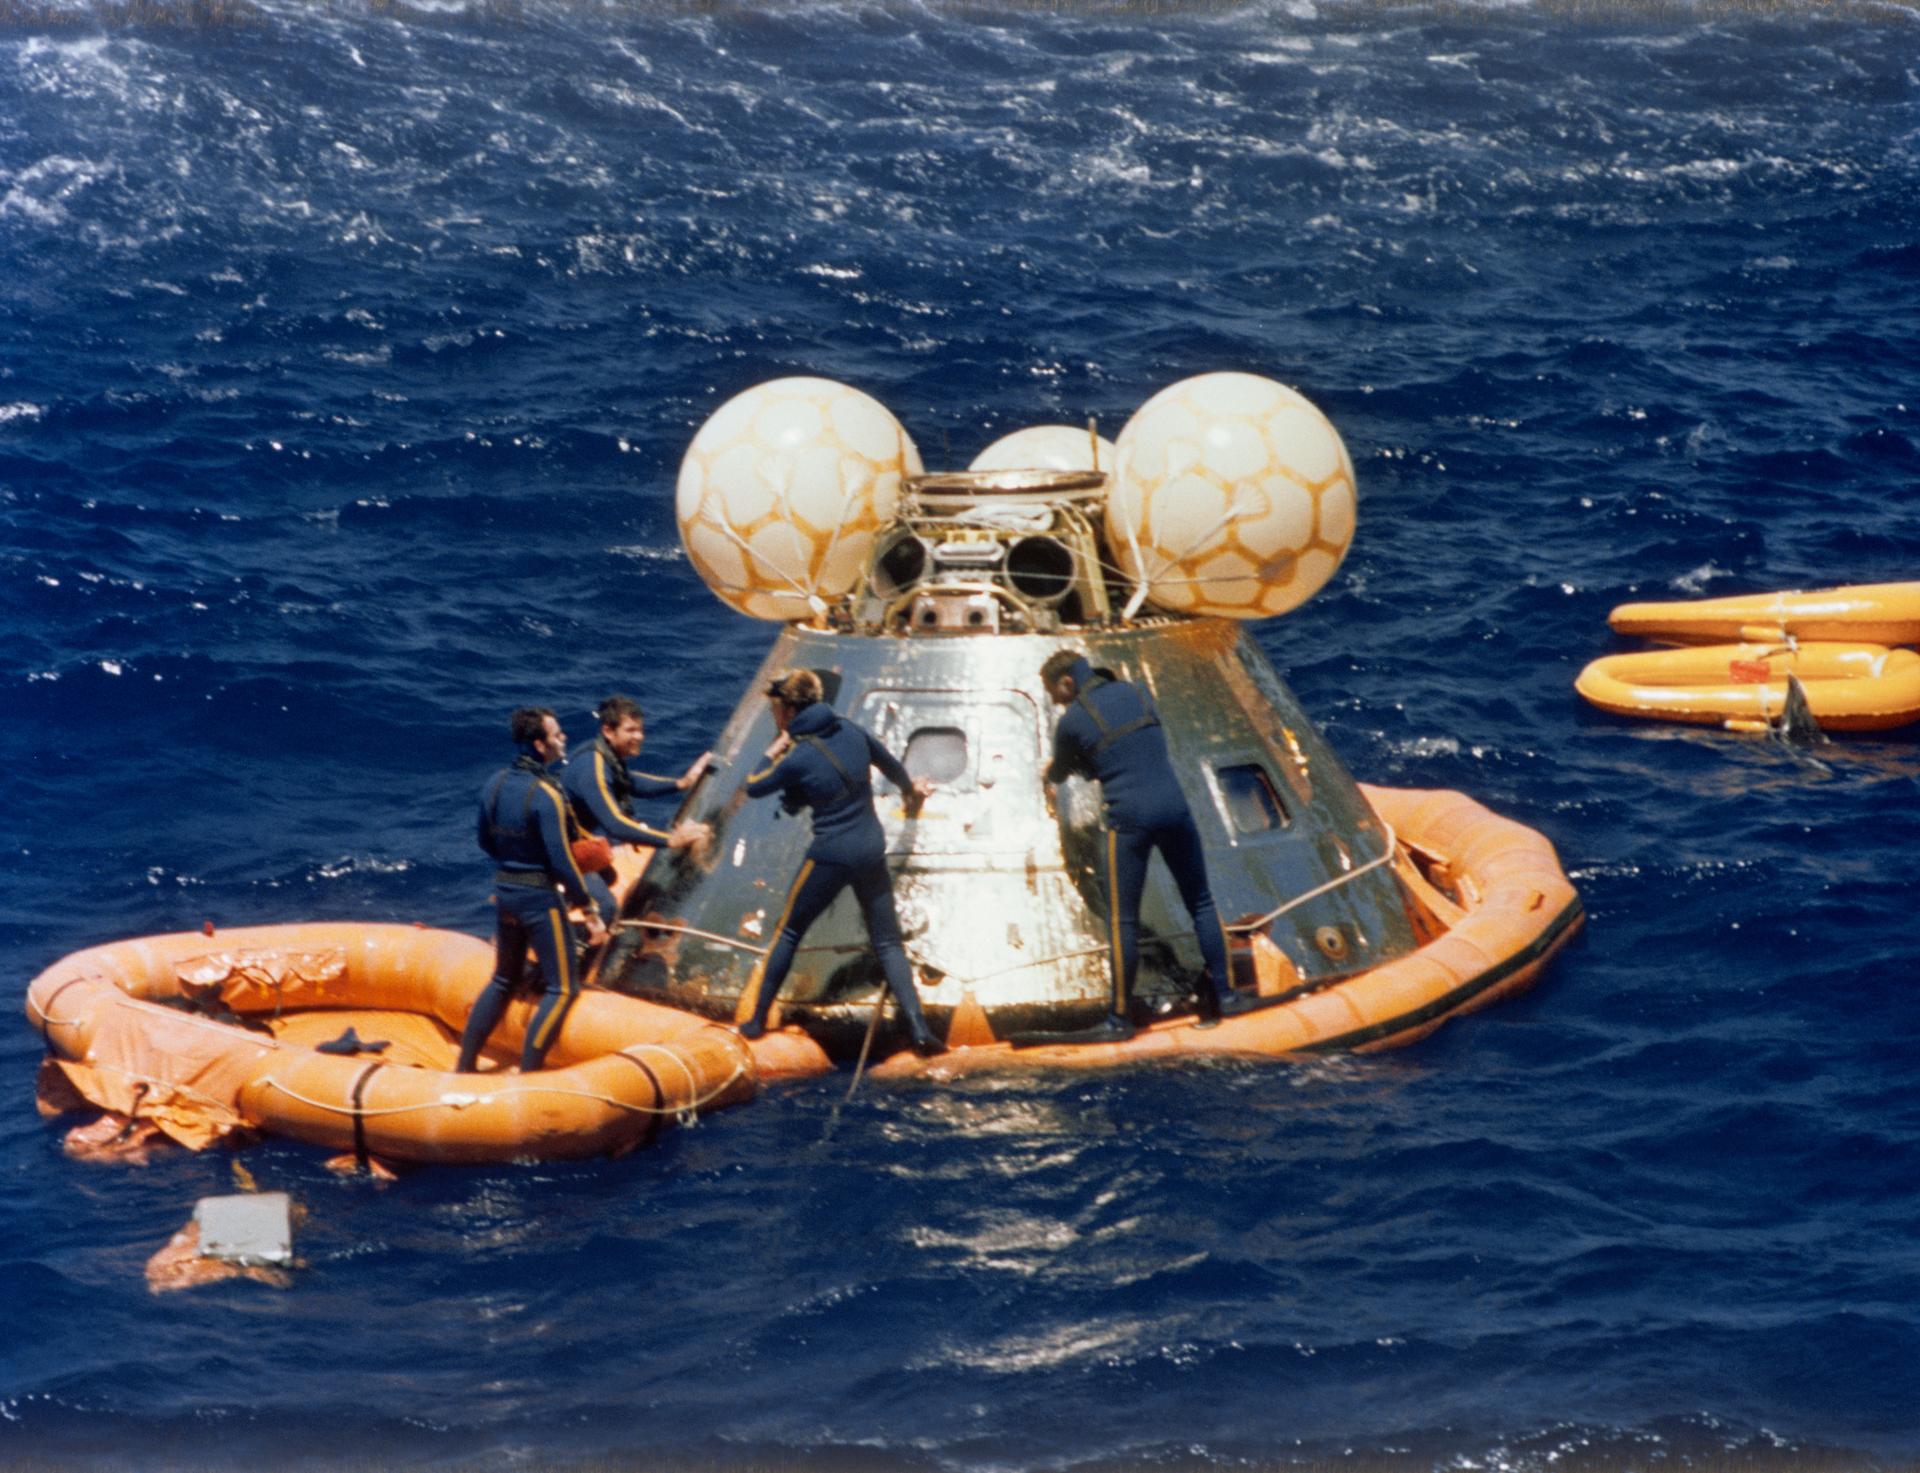 Recovery of the Apollo command module after touchdown in the Pacific Ocean near Hawaii on July 24, 1975.